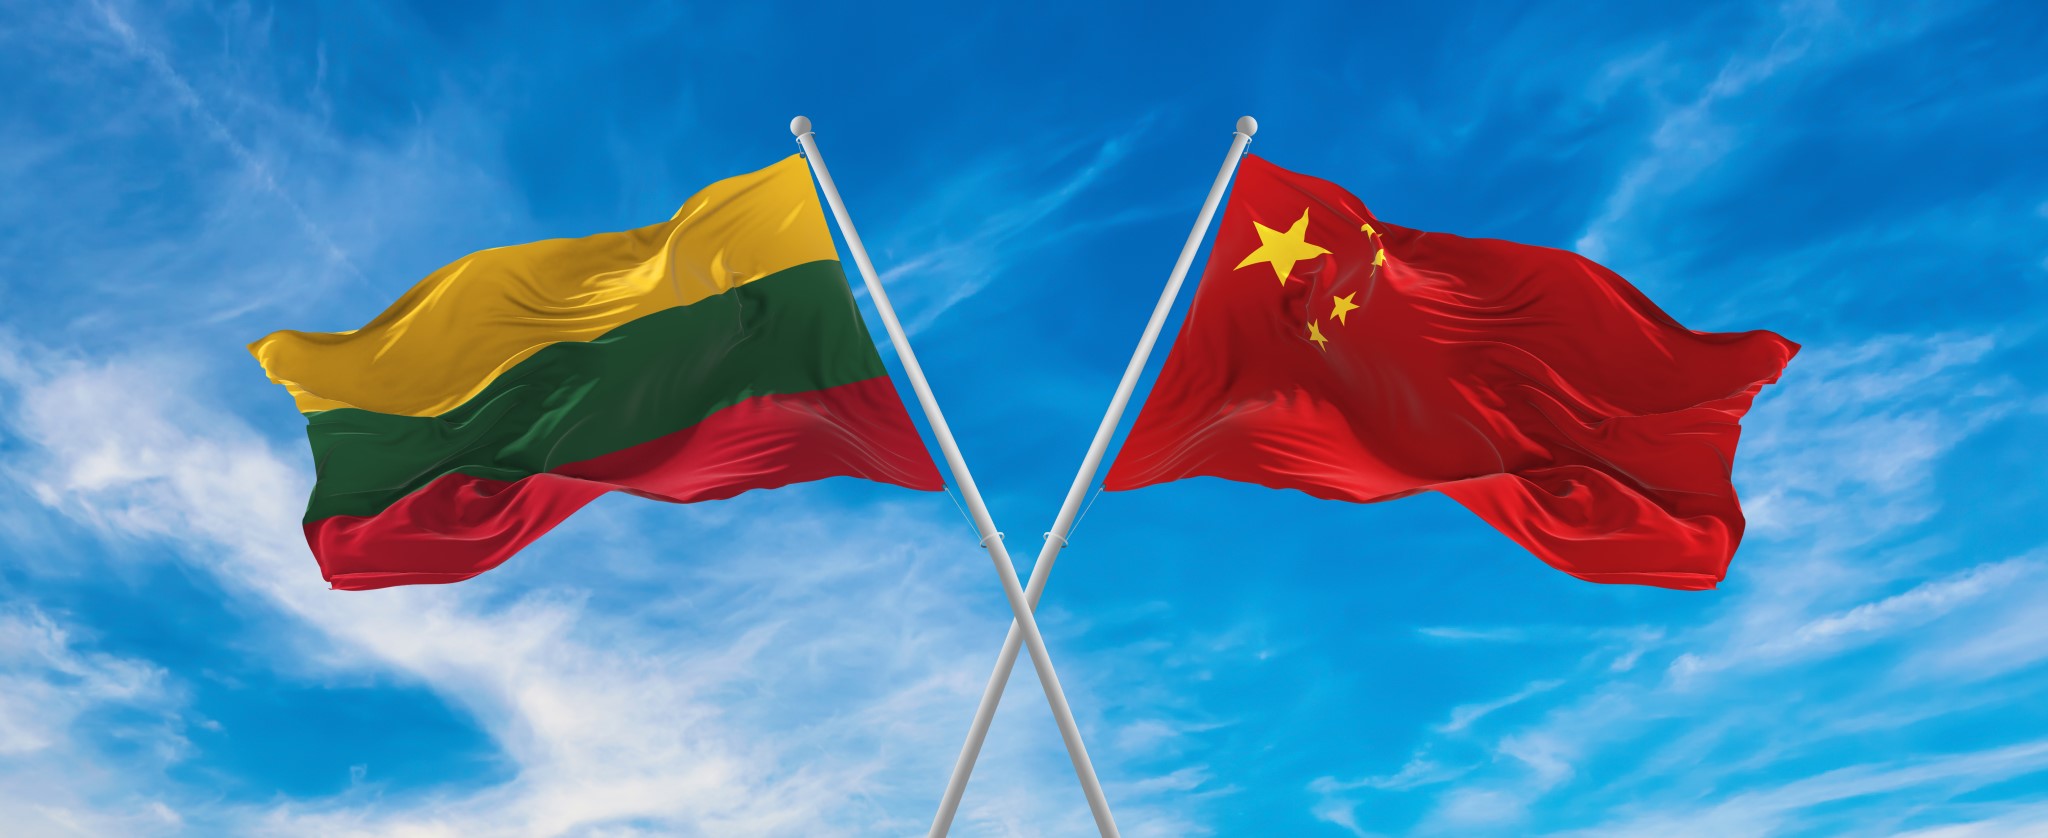 Lithuania's flag and PRC's flag